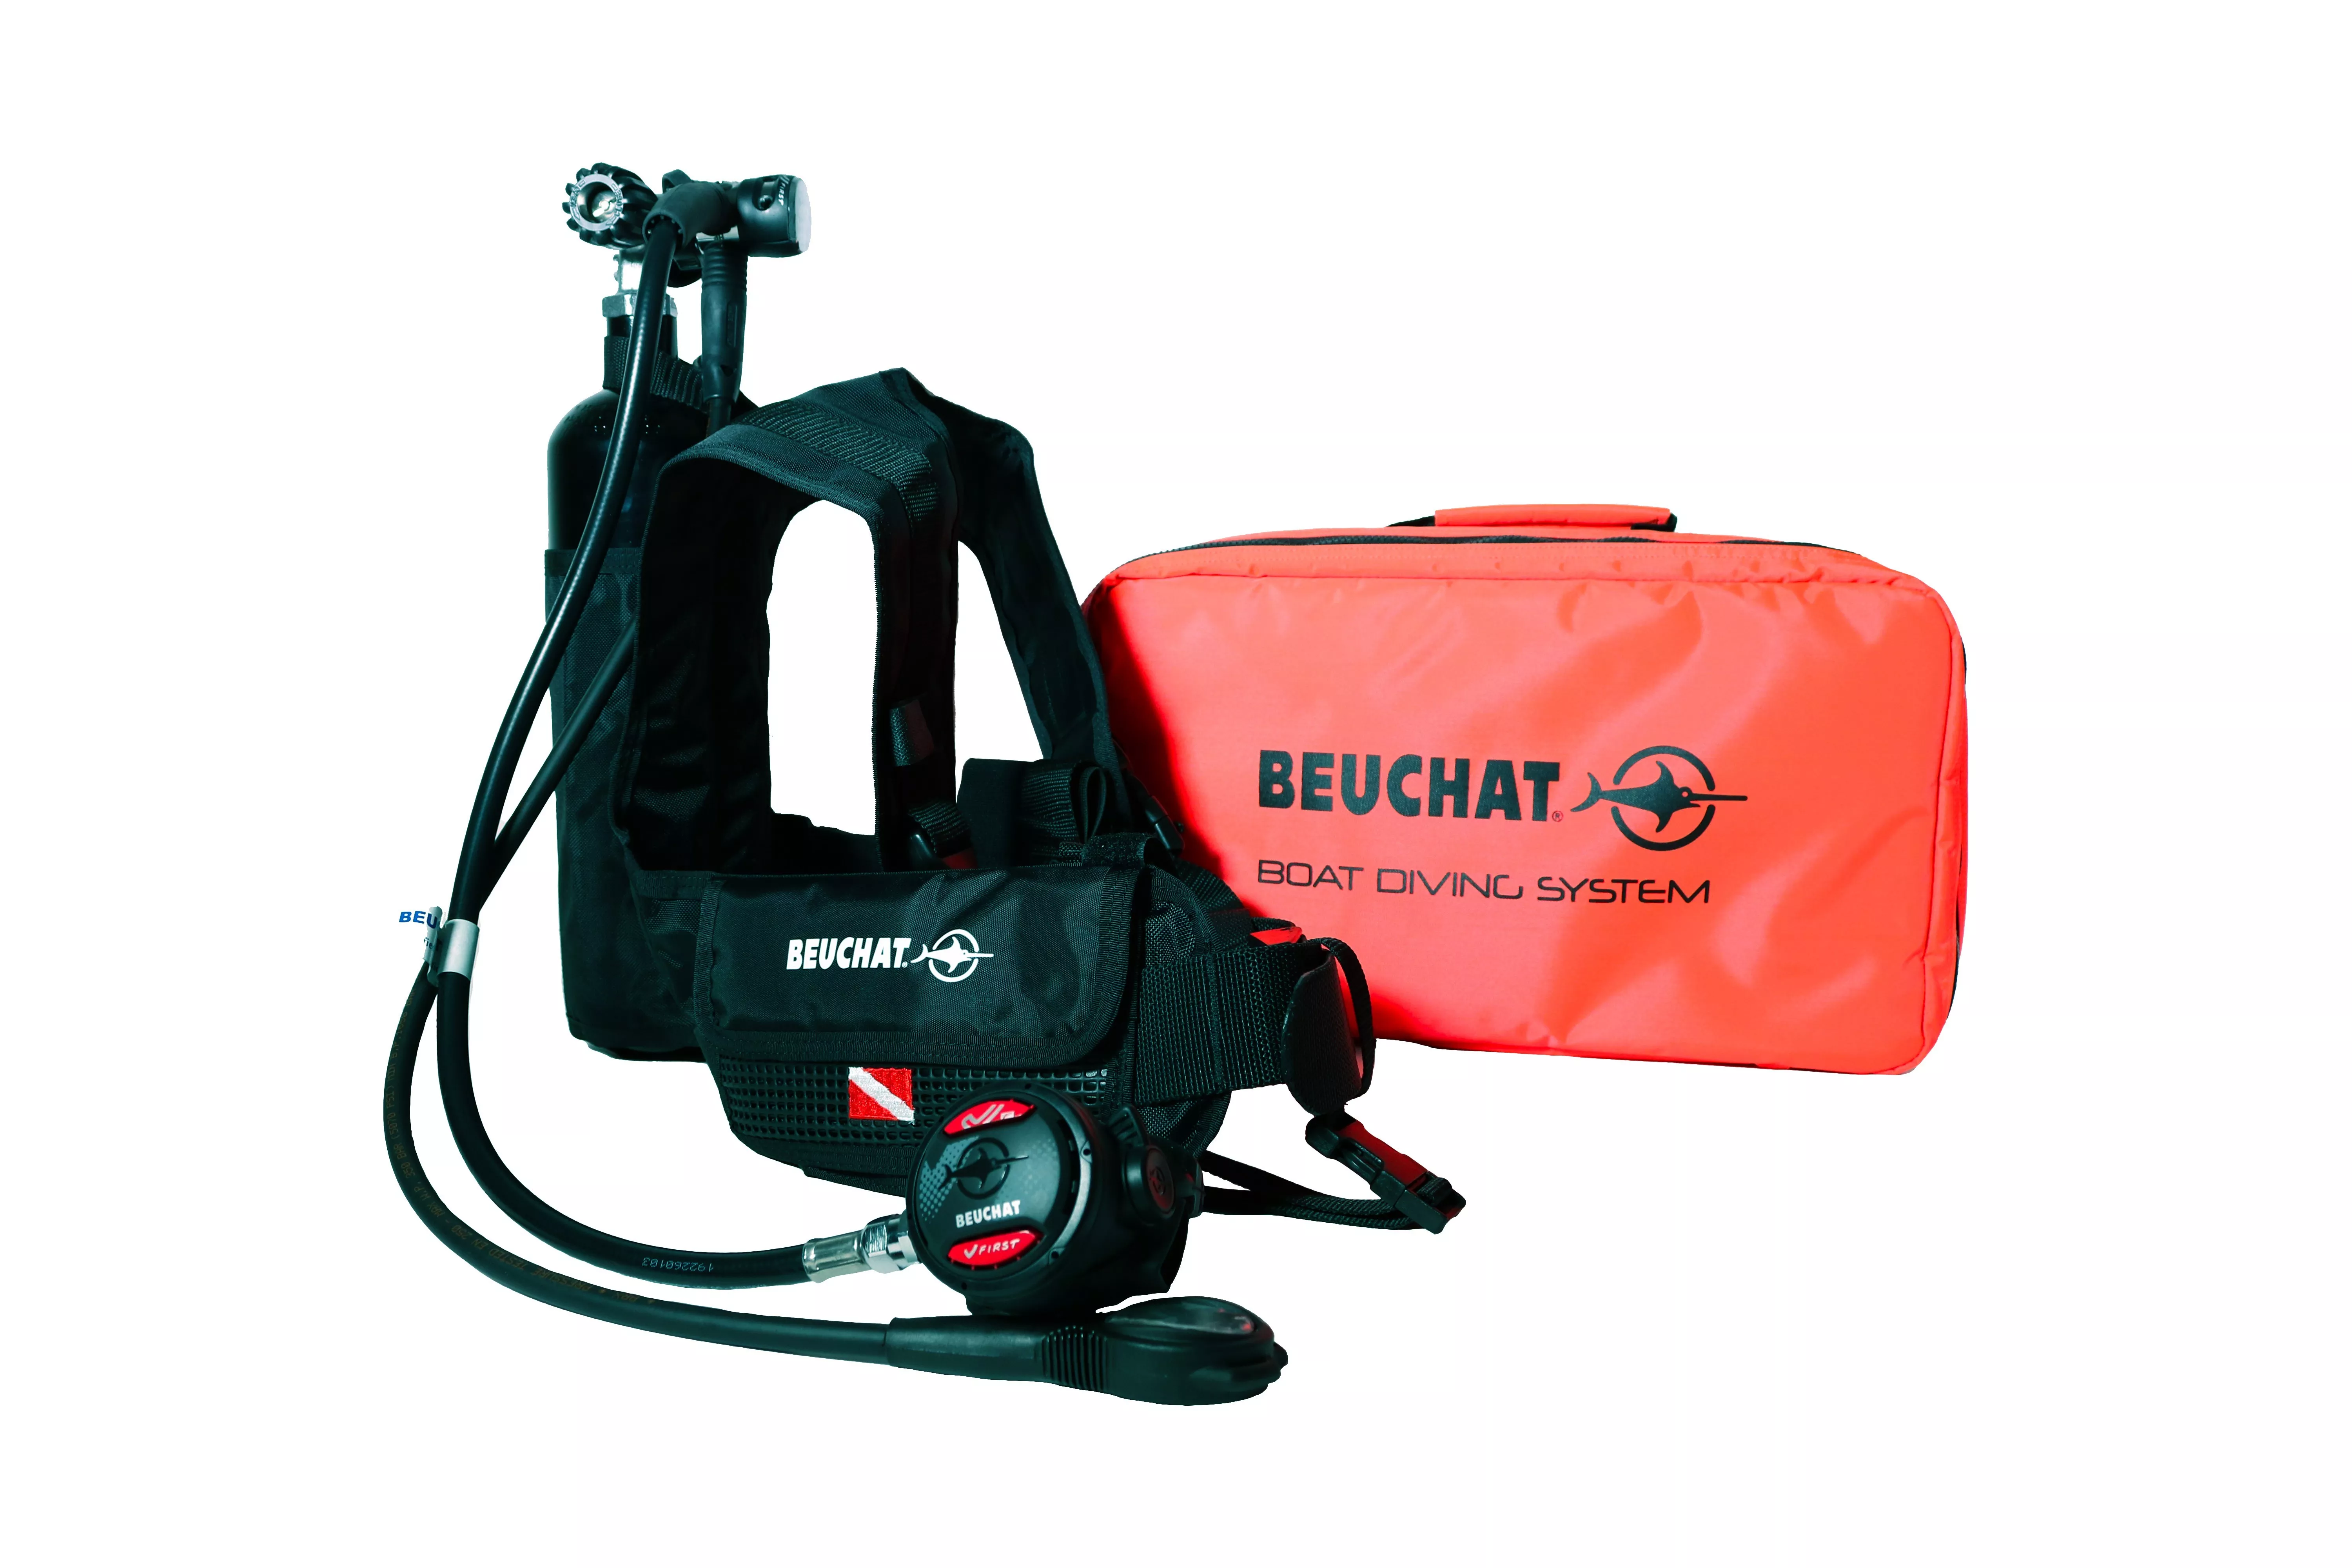 KIT BOAT DIVING SYSTEM BEUCHAT